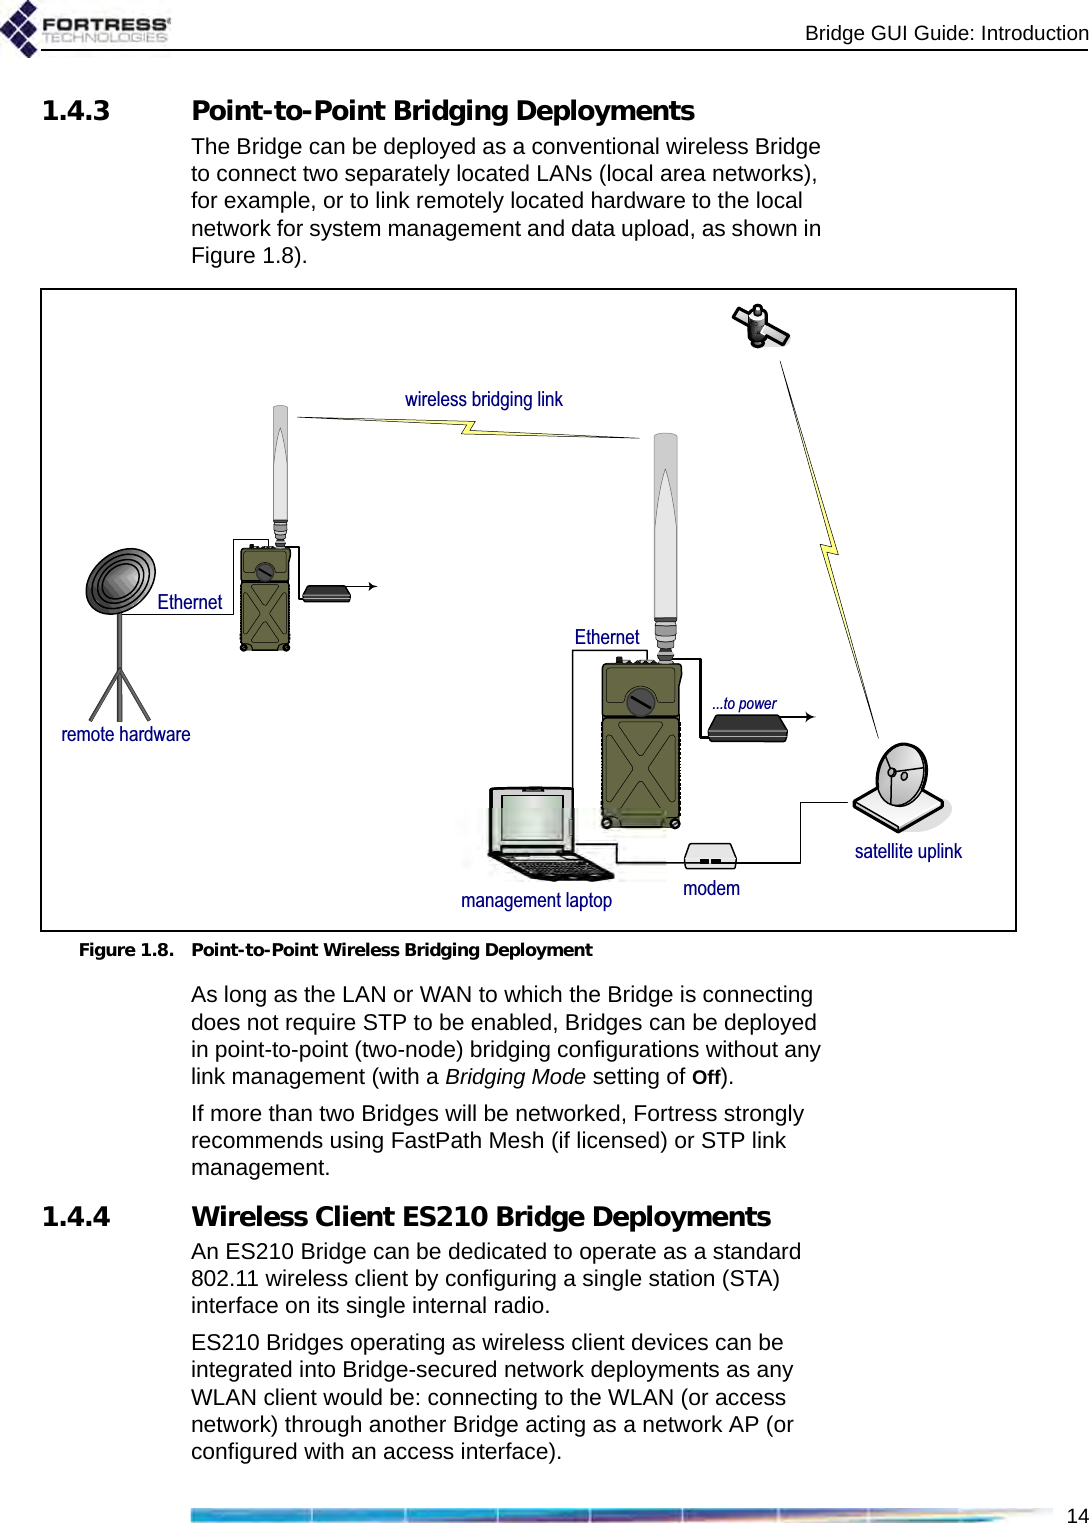 Bridge GUI Guide: Introduction141.4.3 Point-to-Point Bridging DeploymentsThe Bridge can be deployed as a conventional wireless Bridge to connect two separately located LANs (local area networks), for example, or to link remotely located hardware to the local network for system management and data upload, as shown in Figure 1.8).Figure 1.8. Point-to-Point Wireless Bridging DeploymentAs long as the LAN or WAN to which the Bridge is connecting does not require STP to be enabled, Bridges can be deployed in point-to-point (two-node) bridging configurations without any link management (with a Bridging Mode setting of Off).If more than two Bridges will be networked, Fortress strongly recommends using FastPath Mesh (if licensed) or STP link management.1.4.4 Wireless Client ES210 Bridge DeploymentsAn ES210 Bridge can be dedicated to operate as a standard 802.11 wireless client by configuring a single station (STA) interface on its single internal radio.ES210 Bridges operating as wireless client devices can be integrated into Bridge-secured network deployments as any WLAN client would be: connecting to the WLAN (or access network) through another Bridge acting as a network AP (or configured with an access interface).remote hardwaremodemsatellite uplinkmanagement laptopwireless bridging link       ...to powerEthernetEthernet